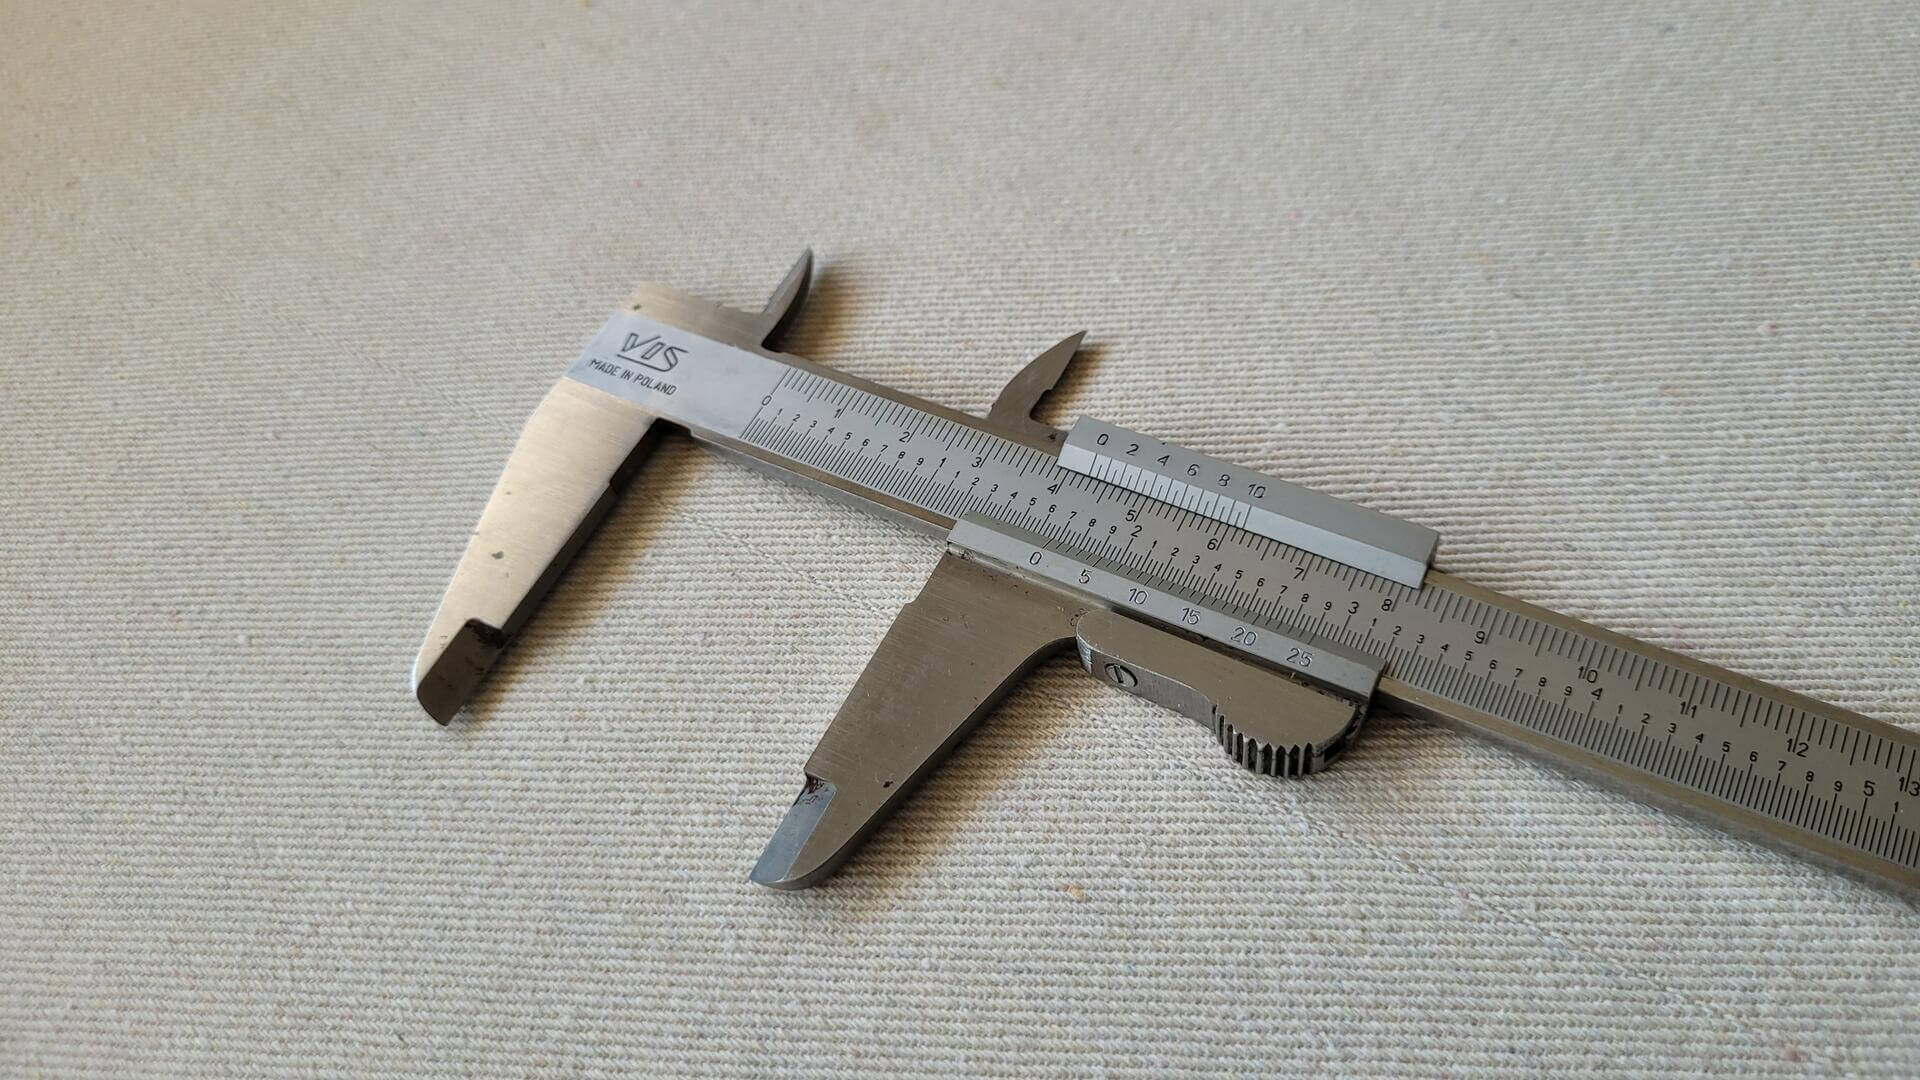 Vintage VIS vernier caliper metric with 1/20mm precision hardened stainless steel. Quality made in Poland machinist marking & measuring precision hand tools